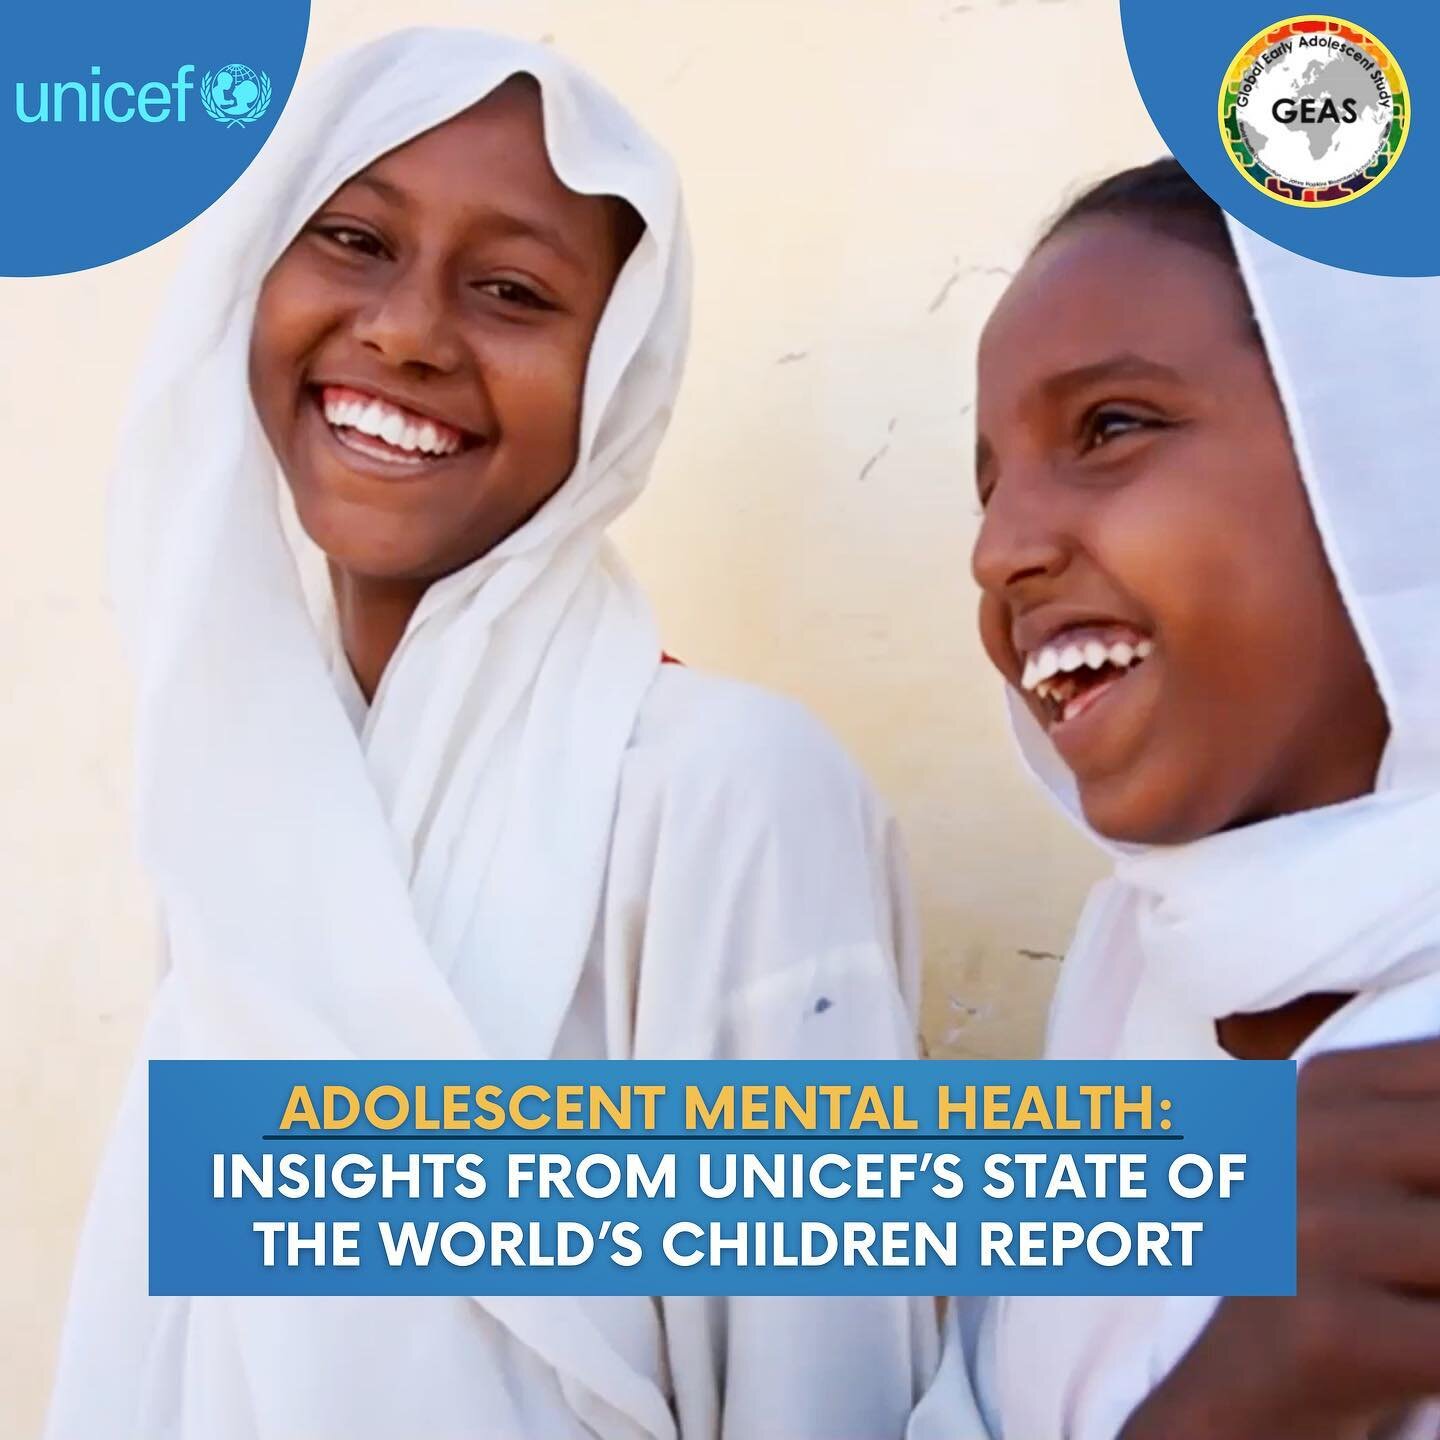 Our researchers, along with specialists from @UNICEF, discussed findings from the State of the World&rsquo;s Children 2021 report and were joined by 2 youth advocates who shared their stories and youth perspectives. 

Watch the video at our Youtube c